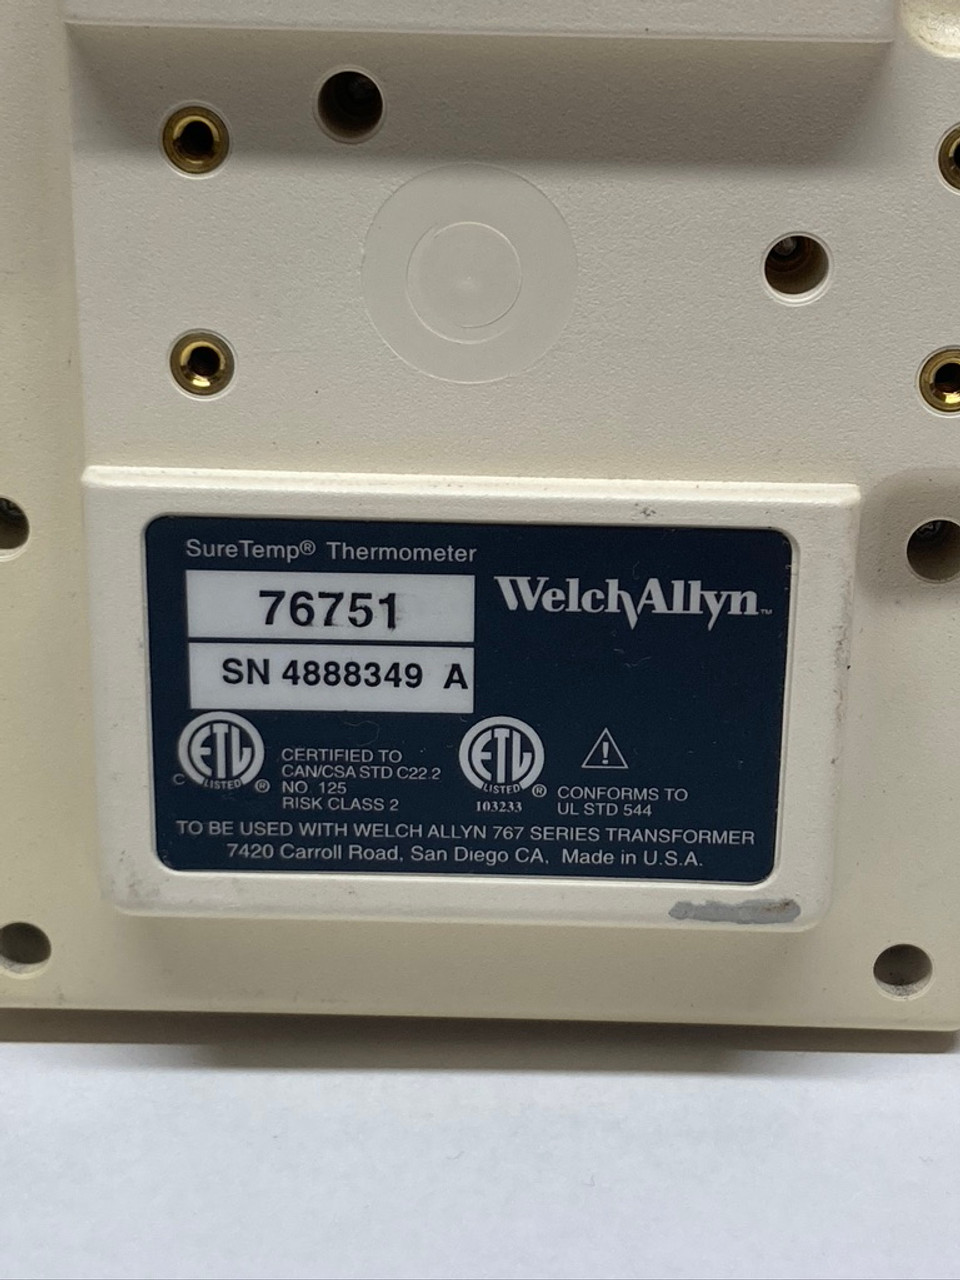 SureTemp Thermometer Module 76751 Welch Allyn